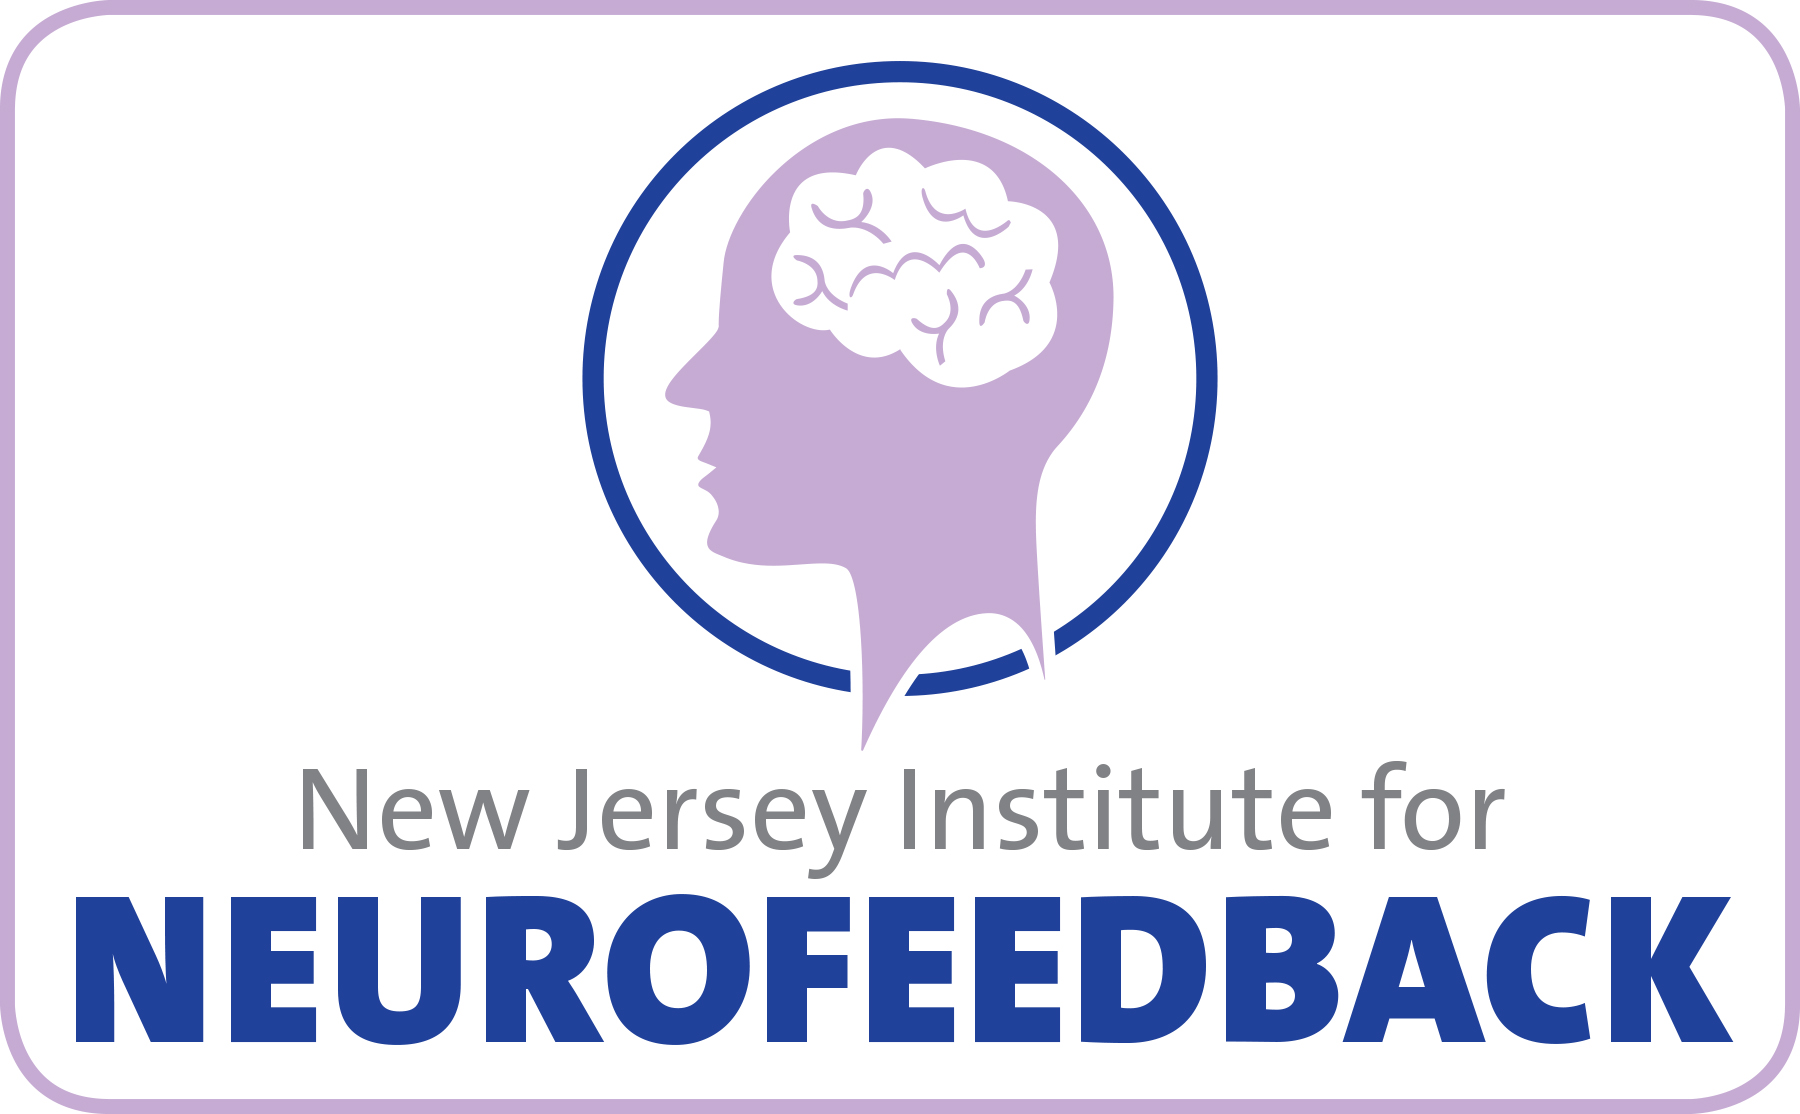 New Jersey Institute For Neurofeedback | Drug-free Treatment For ADHD, Anxiety, and More